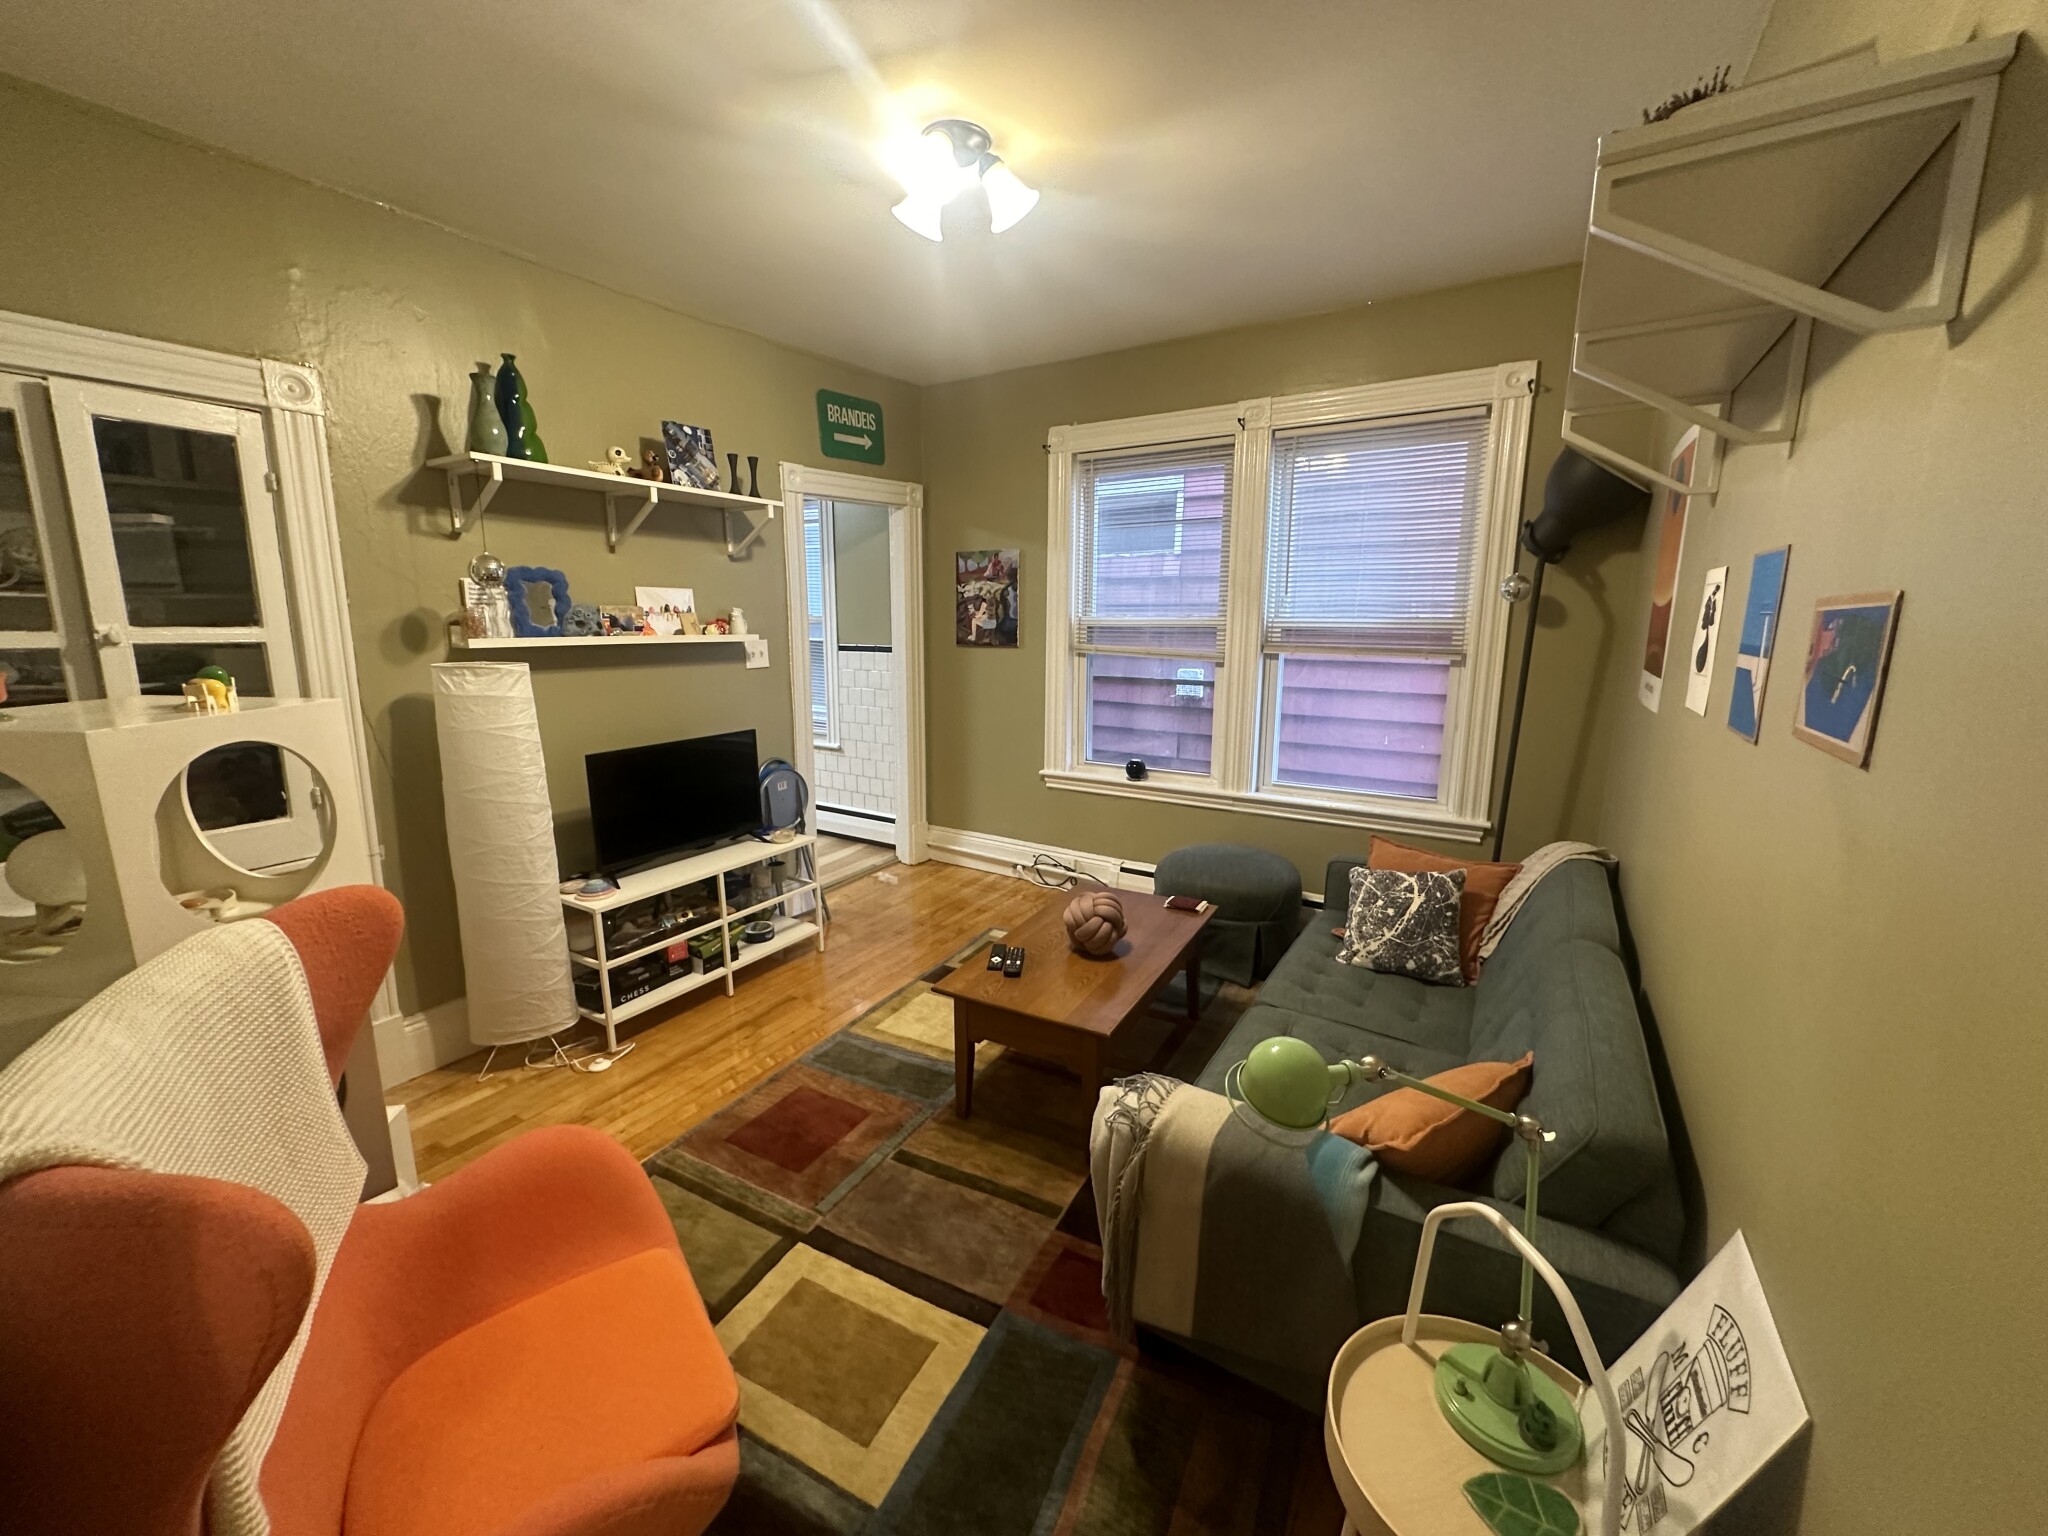 Photos of apartment on Medford St.,Somerville MA 02143